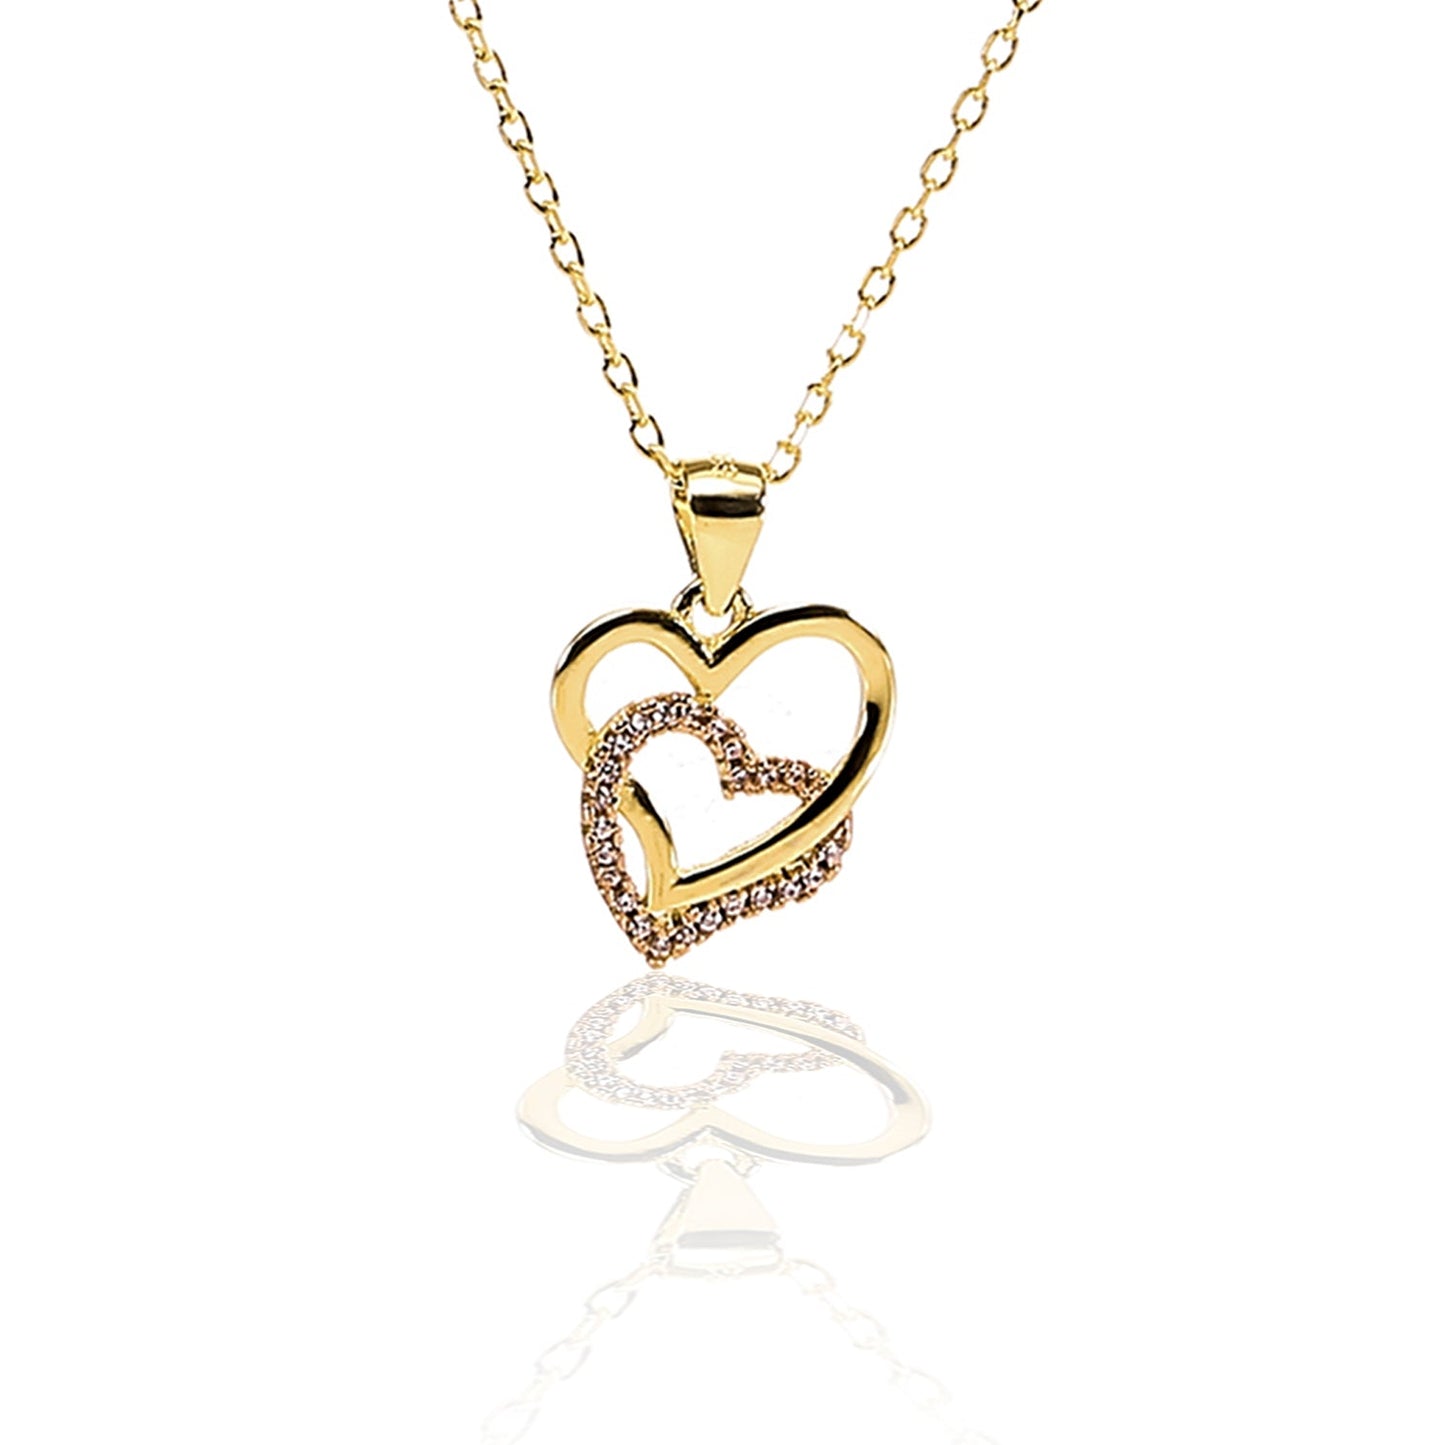 Forever Love Interlocked Heart Pendant Necklace and Earrings Set - ARJW1004GD ARCADIO